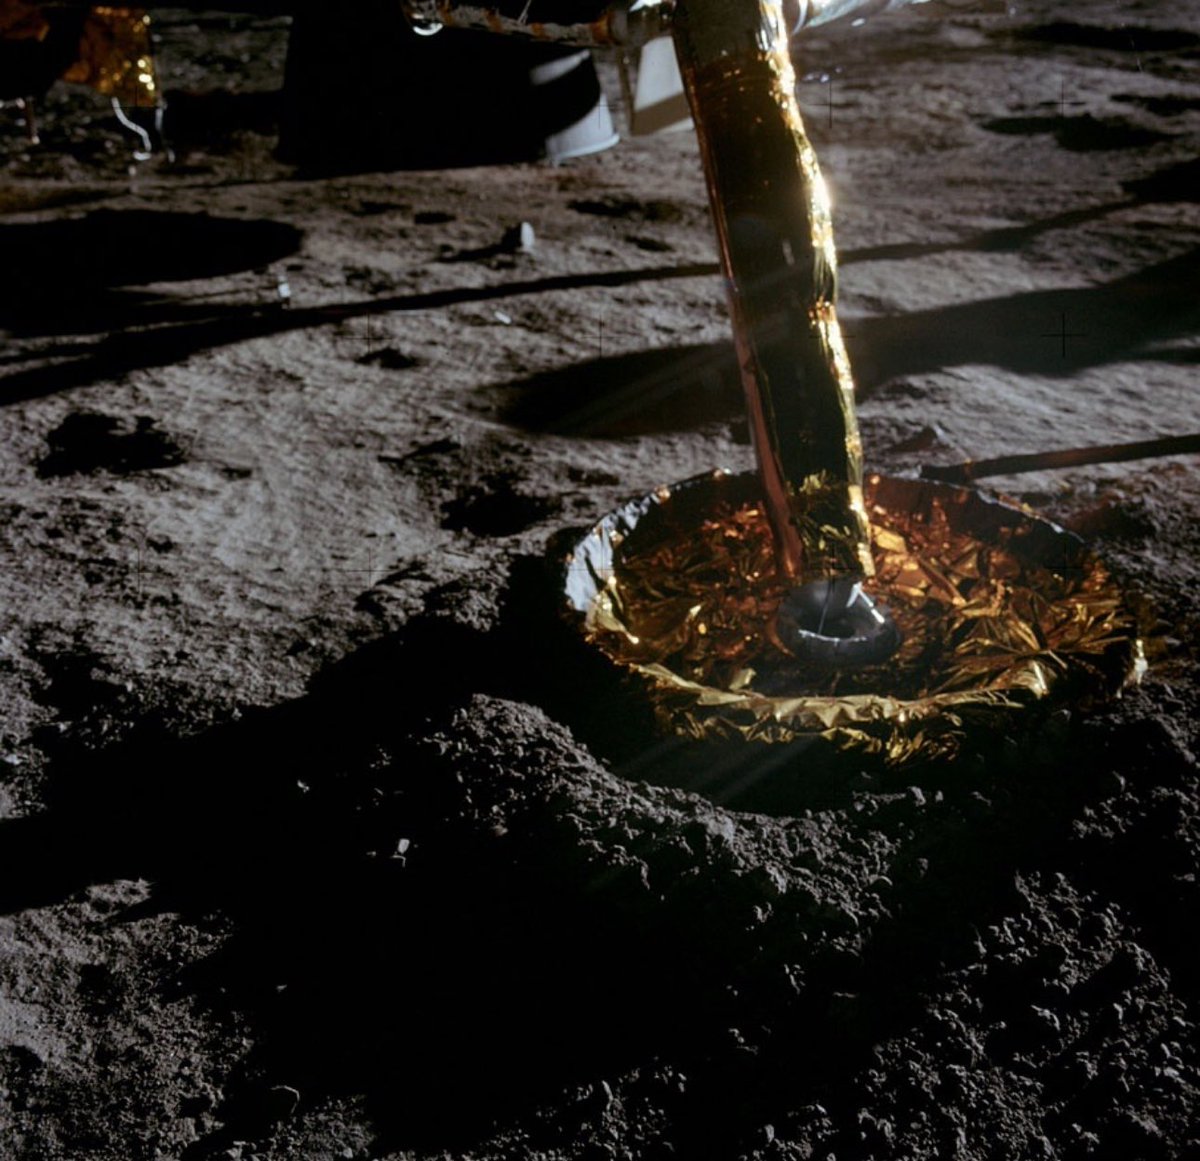 @carsharkbit @TedLogan1010 @BillSEsquire_11 @No_Curve @Death6102 @phone_booth_pod Here’s photos of Apollo 12 that landed with a little lateral velocity.. pushing up regolith around the footpad of the lander. Landing areas were also swept away by the their descent engines… so much of the fine dust was blown away. I know that true facts are hard for flerfs. You…